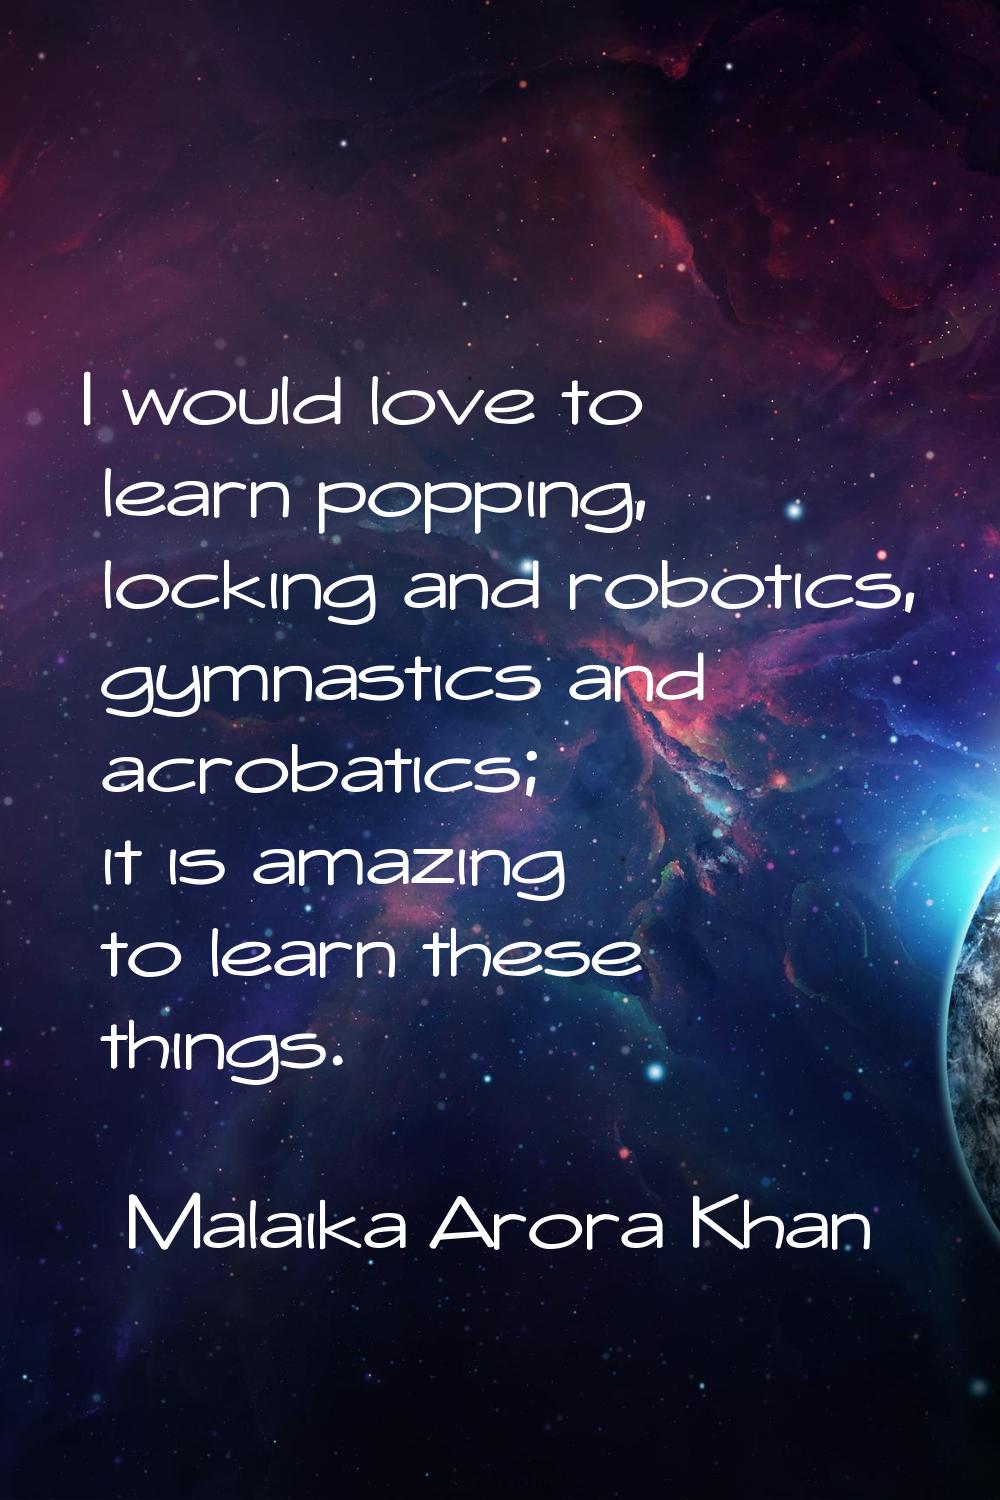 I would love to learn popping, locking and robotics, gymnastics and acrobatics; it is amazing to le